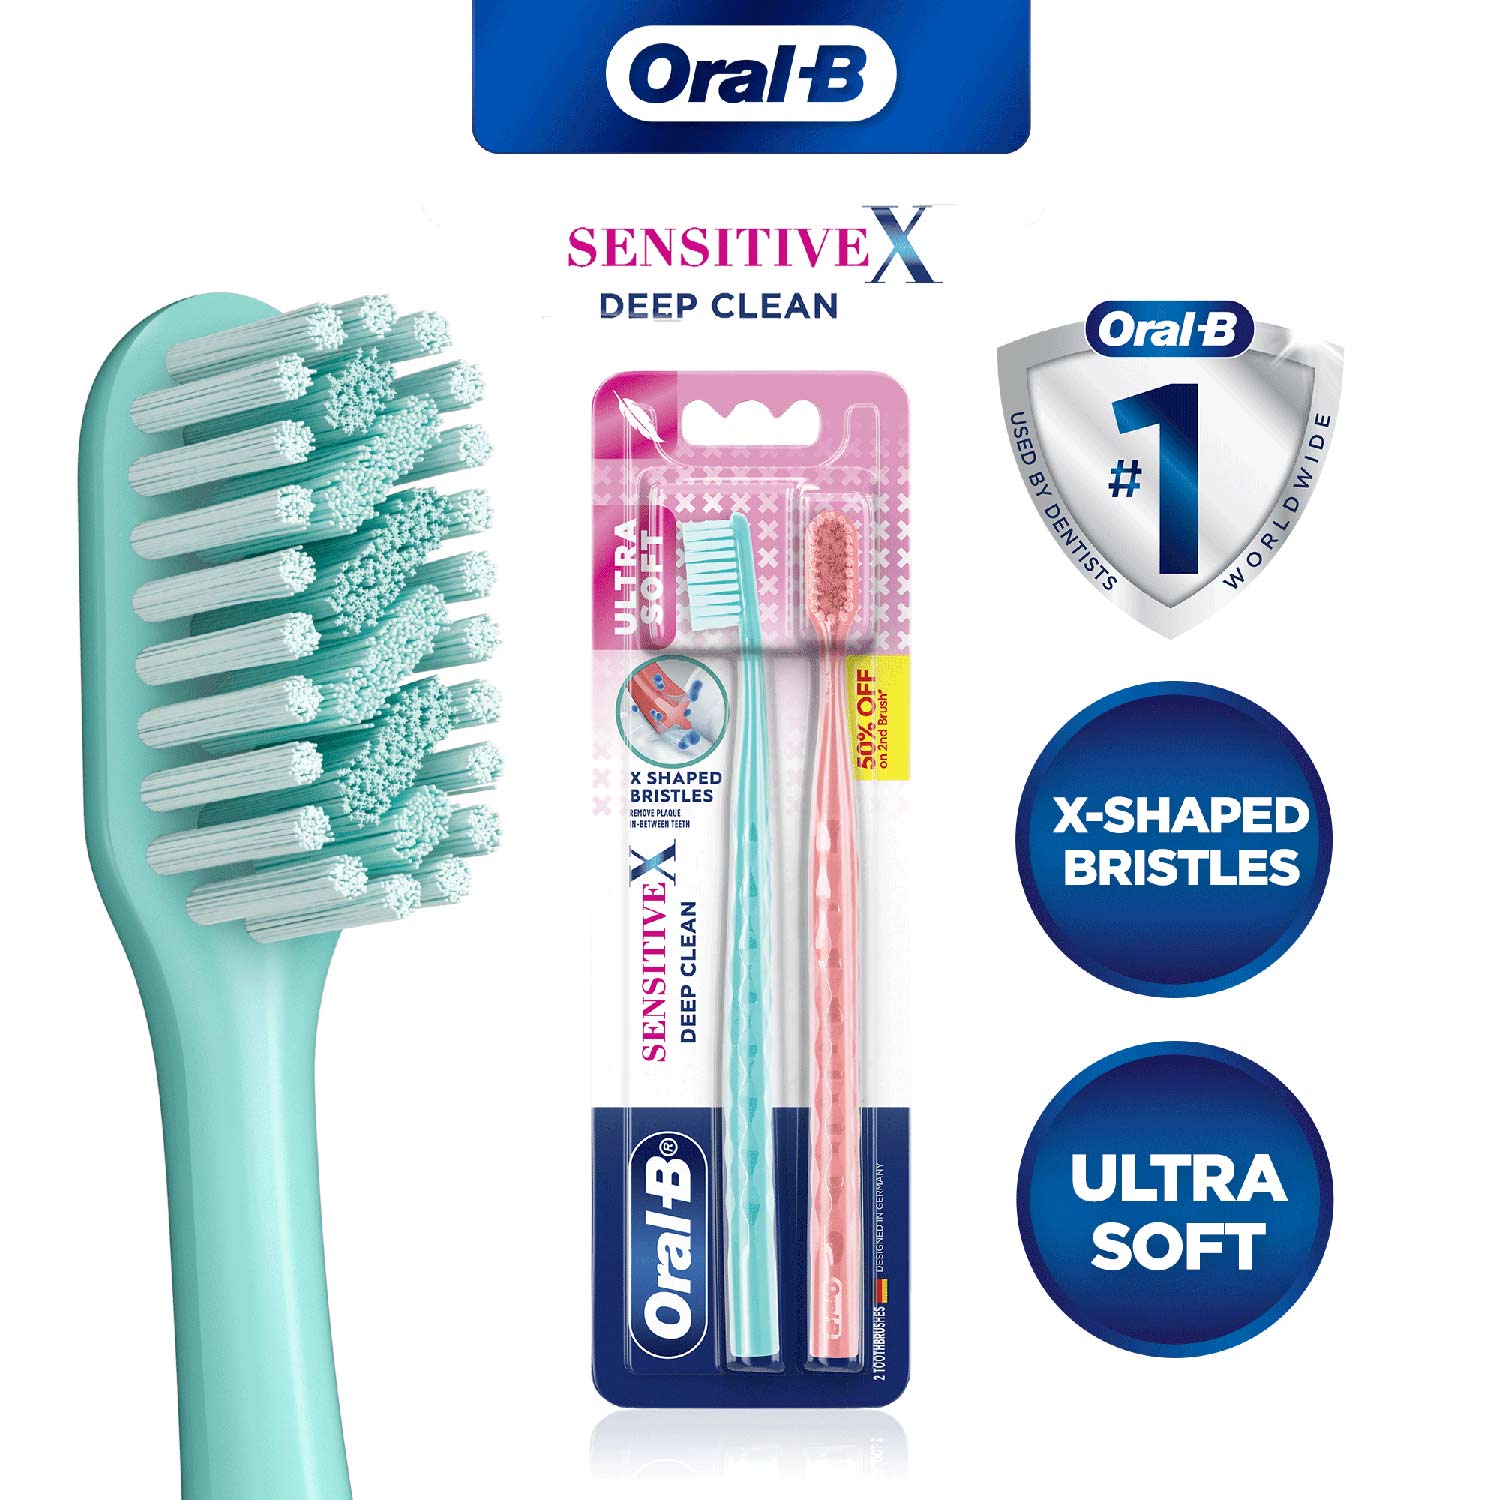 Oral-B Sensitive X Deep Clean– Ultra Soft Bristles & X-Filament technology for Gentle yet Superior Clean, Manual Toothbrush Pack of 2 Pcs (Buy 1 Get 1 Free)